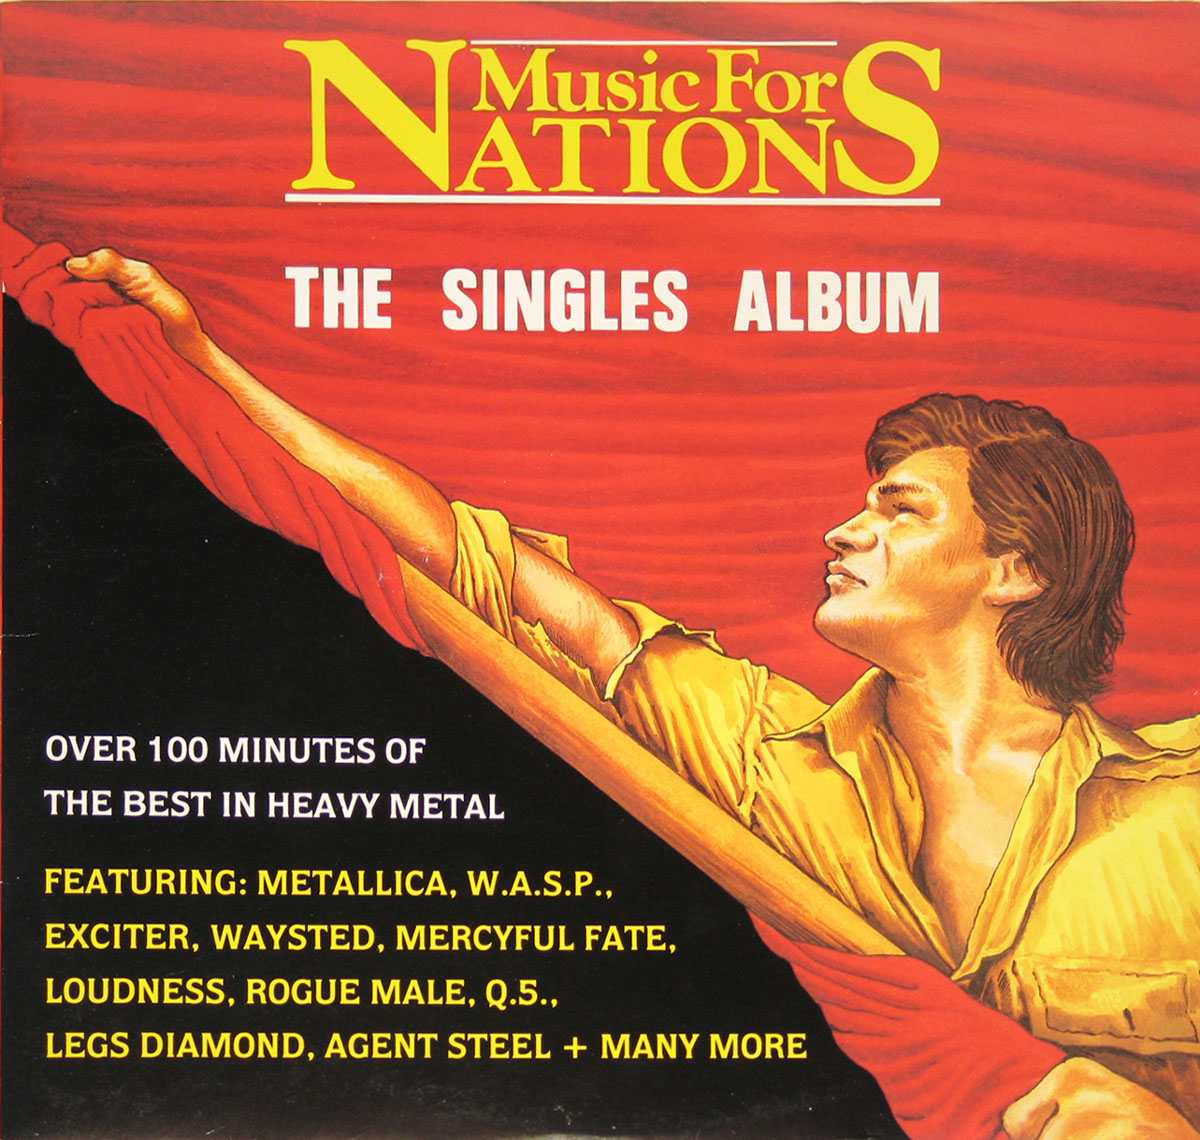 High Resolution # Photo MUSIC FOR NATIONS The Singles Album 